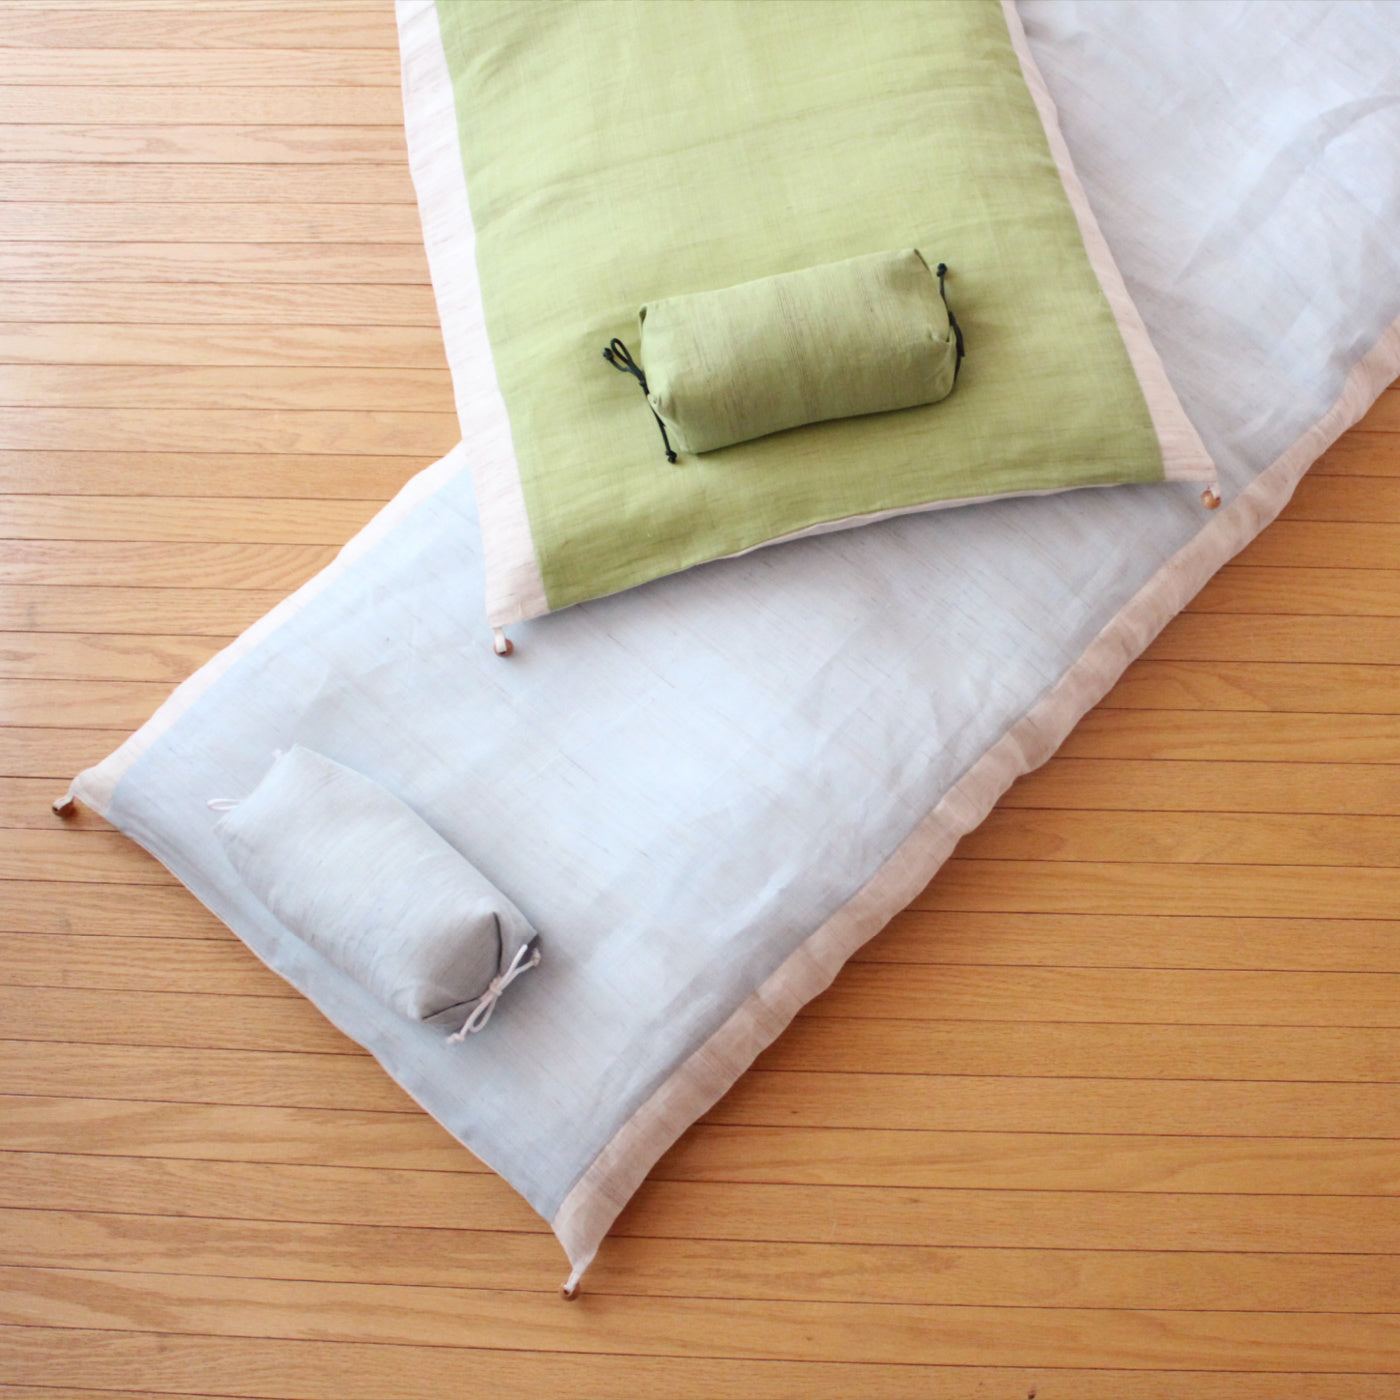 The name Gorone is a combination of two Japanese words: goron (ごろ) and ne (寝). Goron means to flop down and to make yourself comfortable, while ne means to sleep. Linen is good for summer and make you feel cool and refreshing.